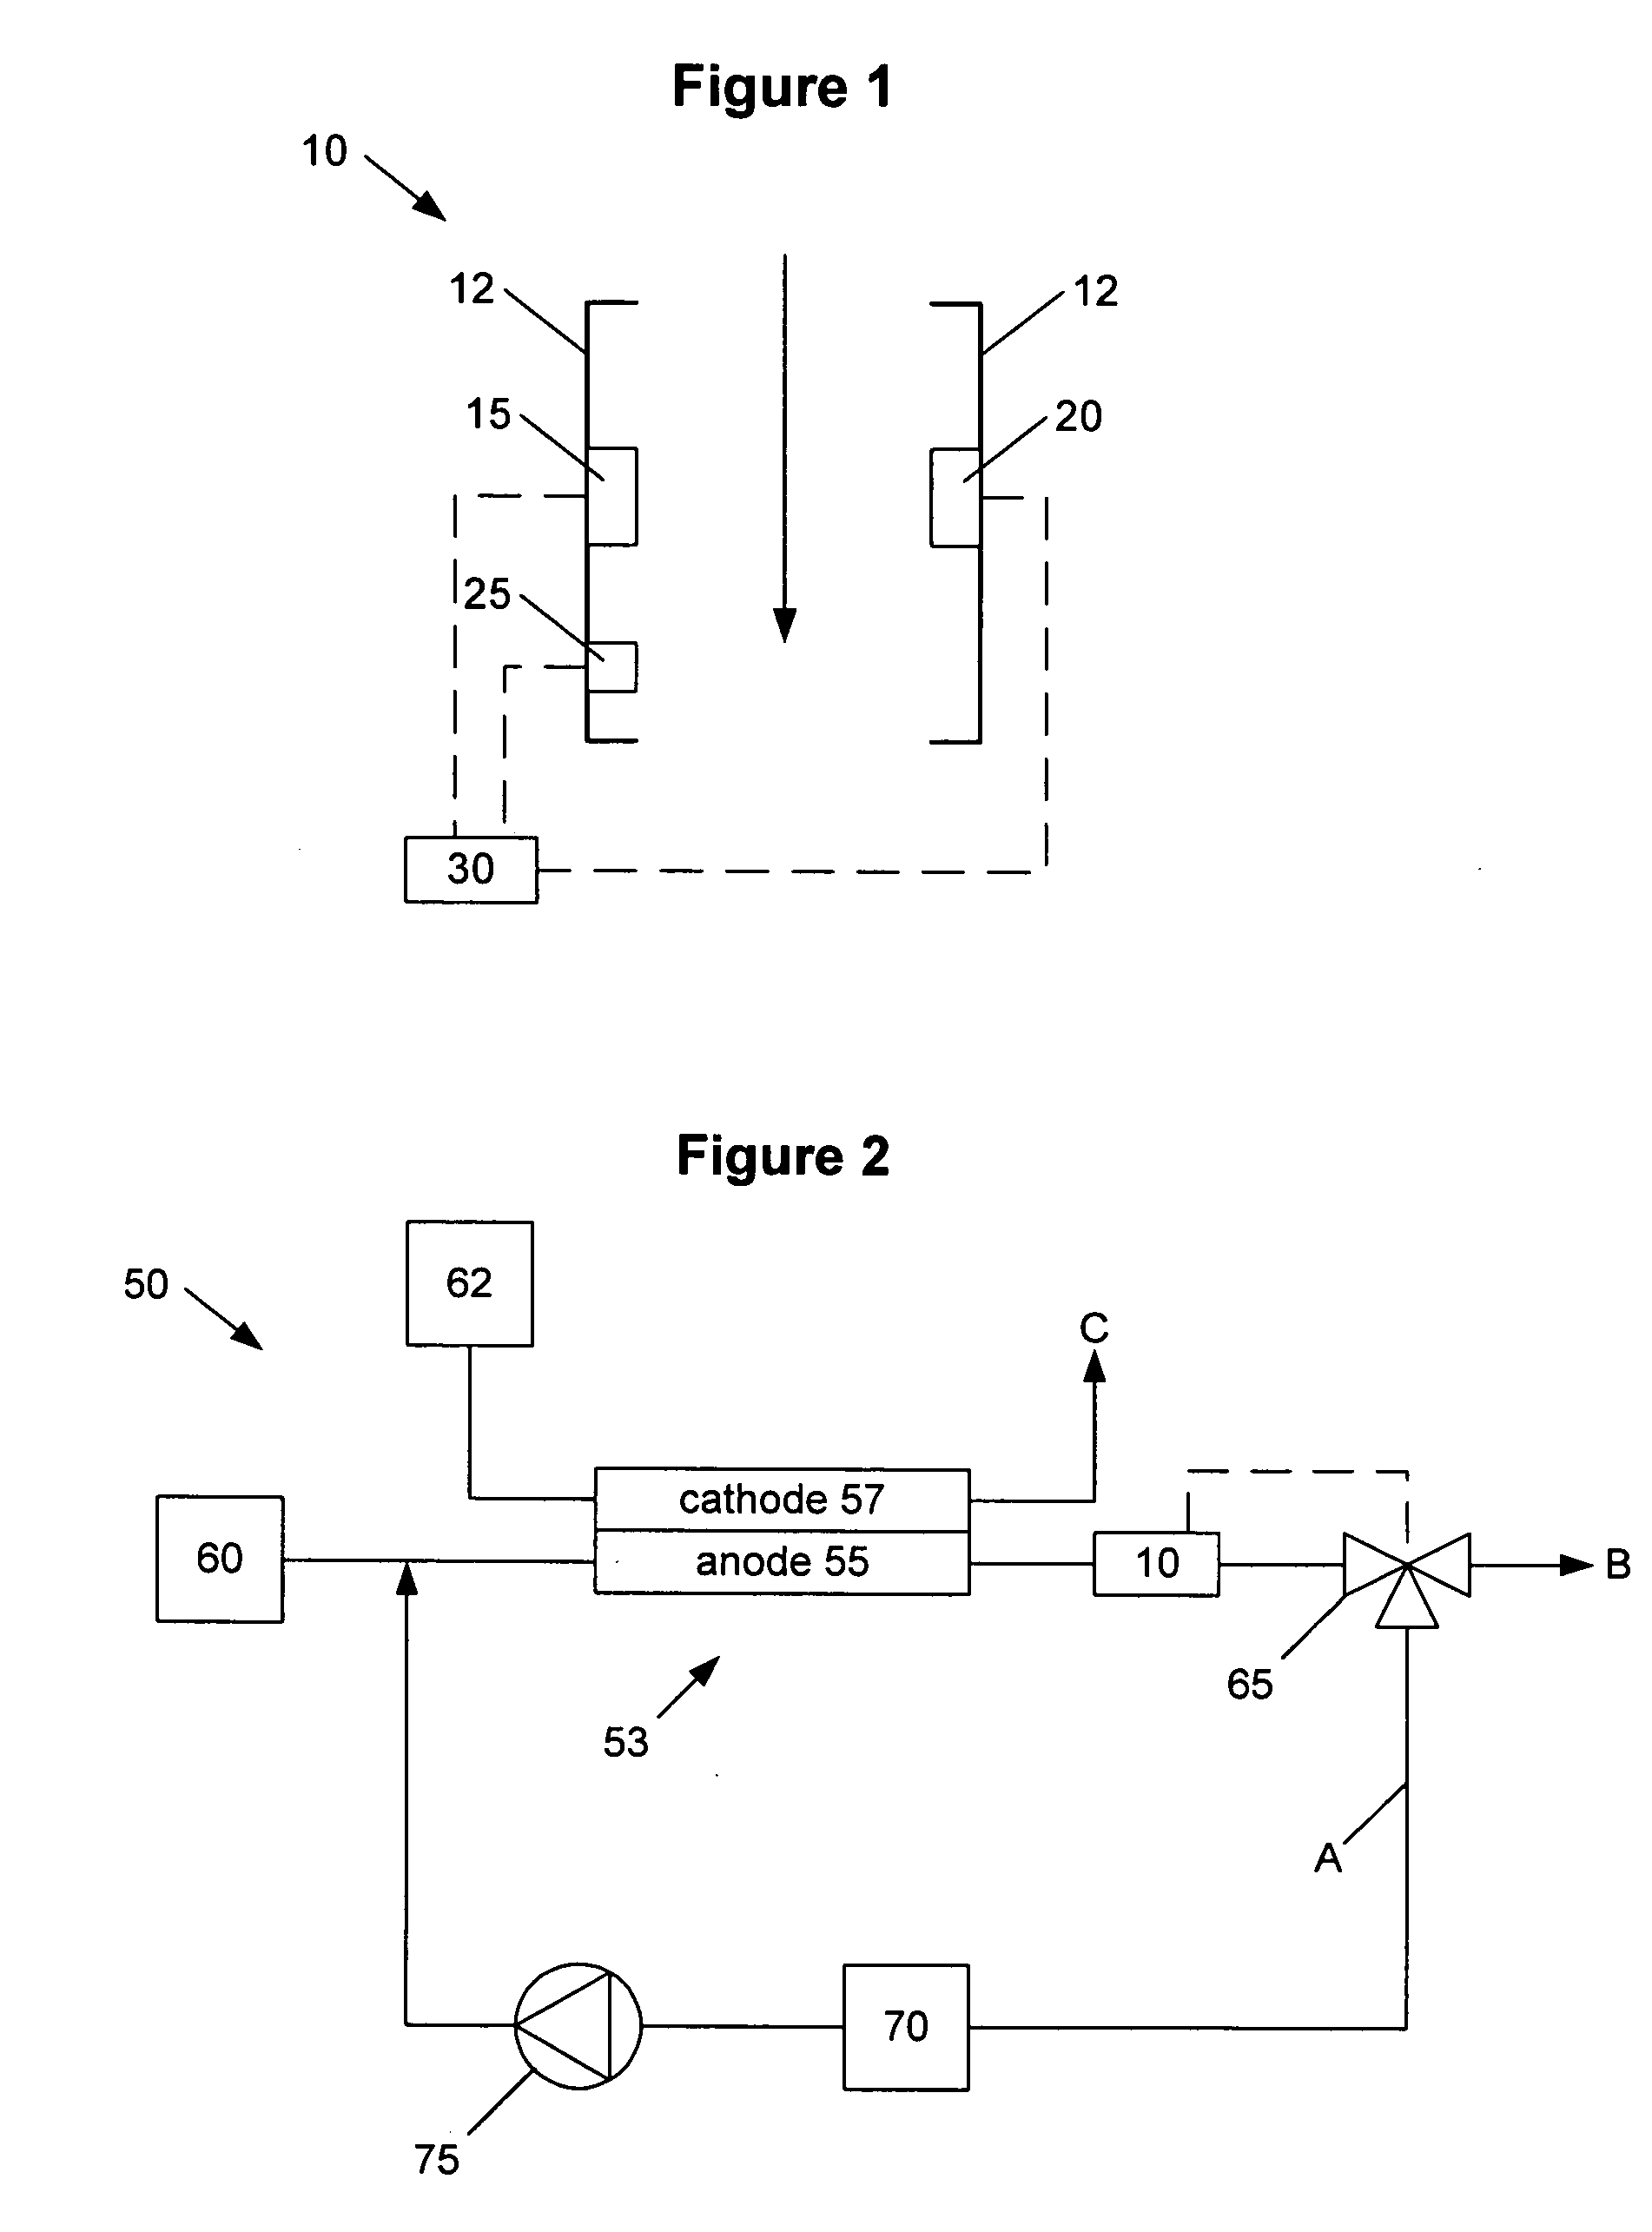 Hydrogen concentration sensor for an electrochemical fuel cell